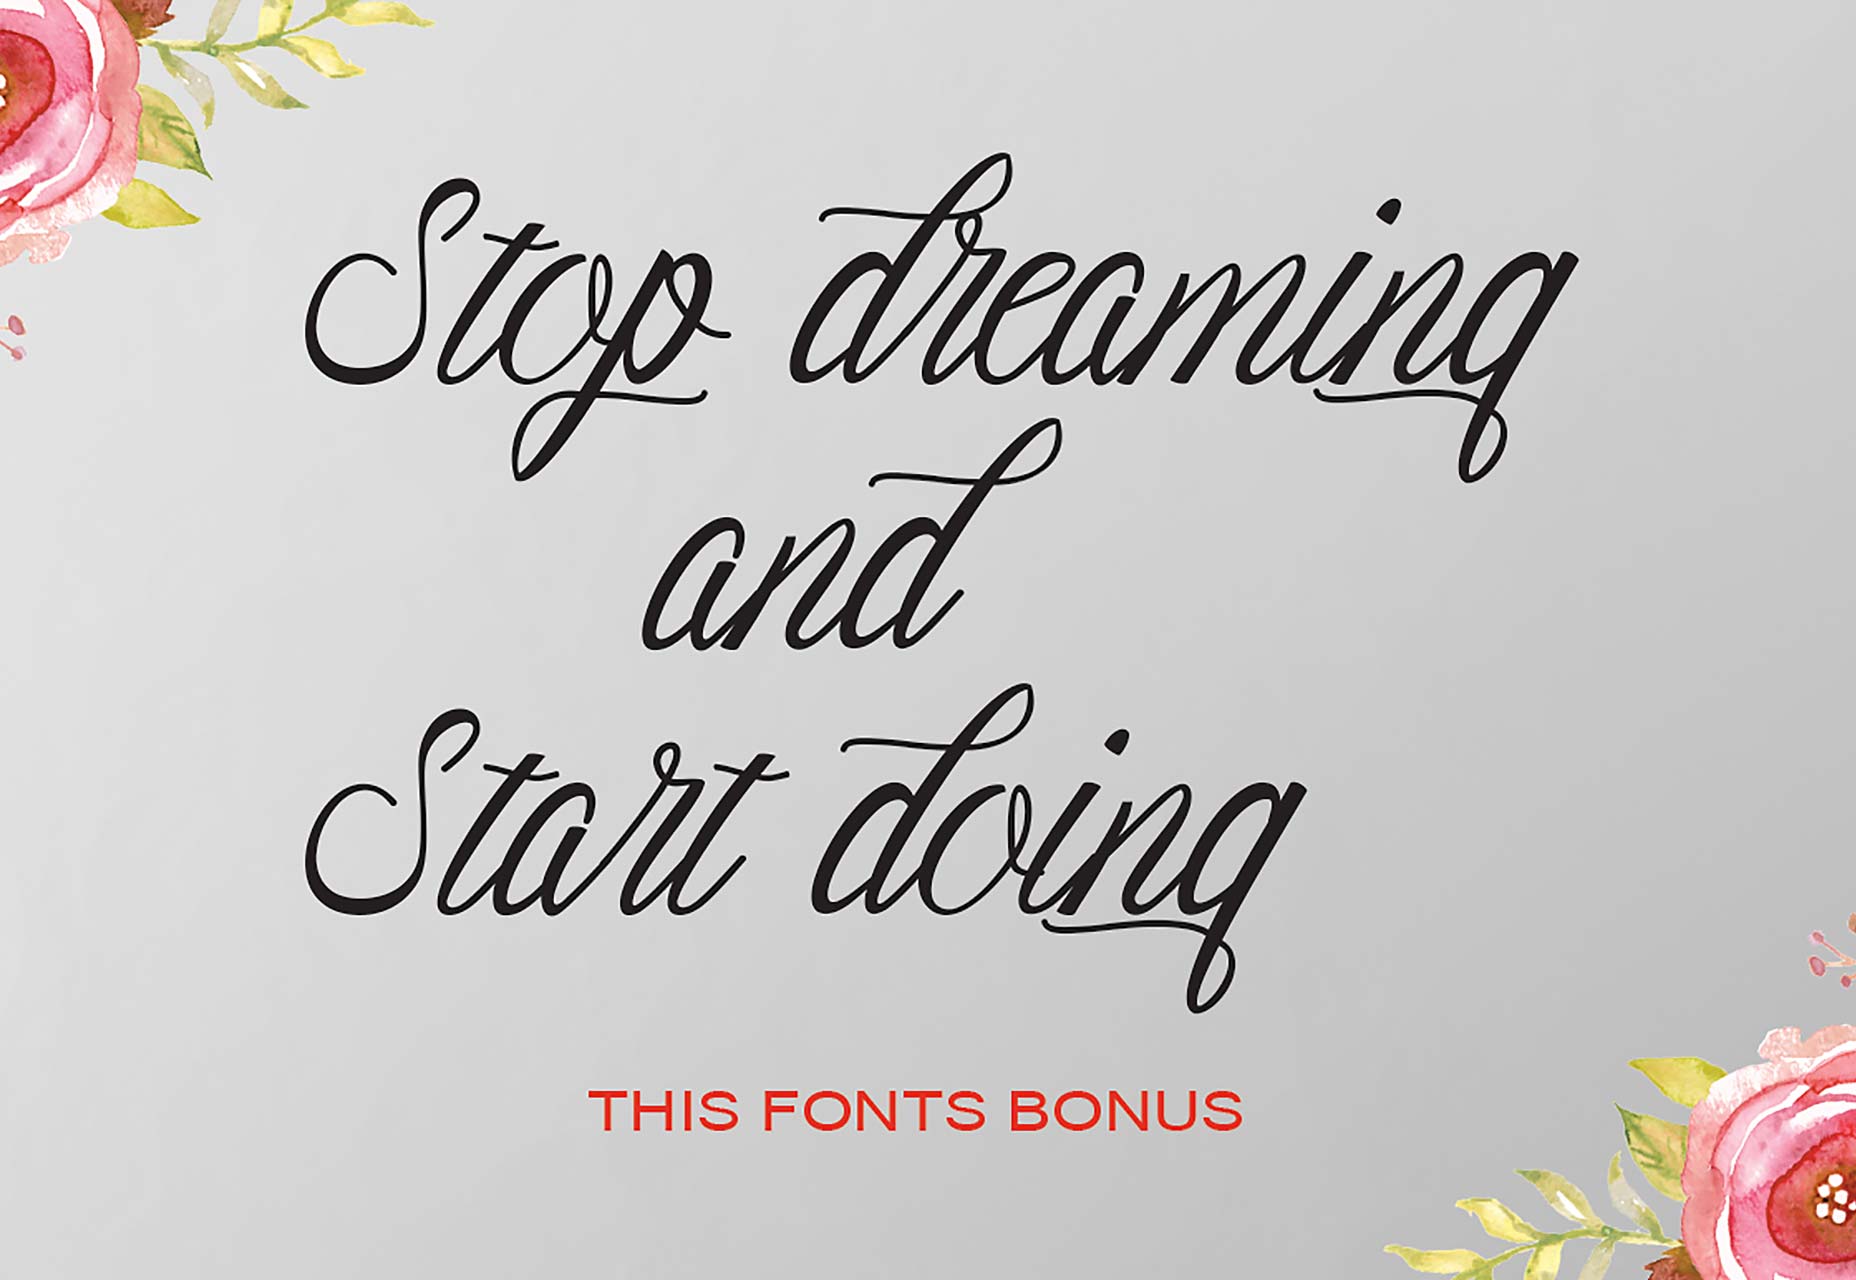 free font downloads for mac